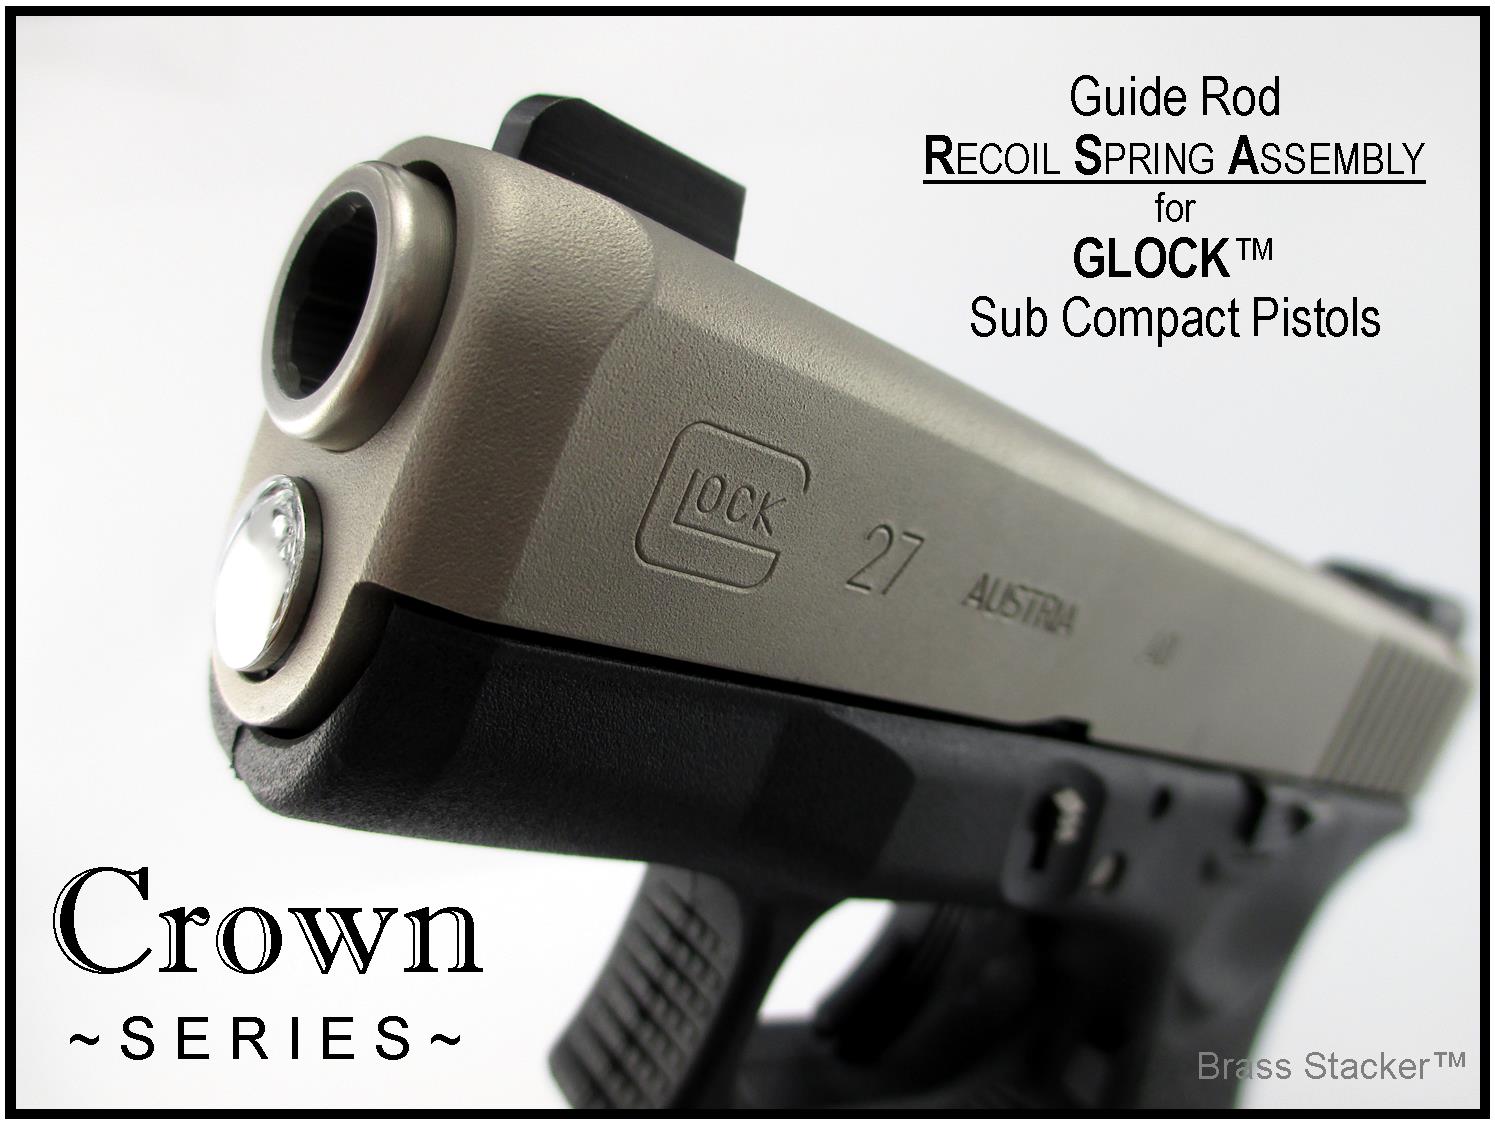 Brass Stacker™ RSA for Glock™ Sub Compact Frame Pistols